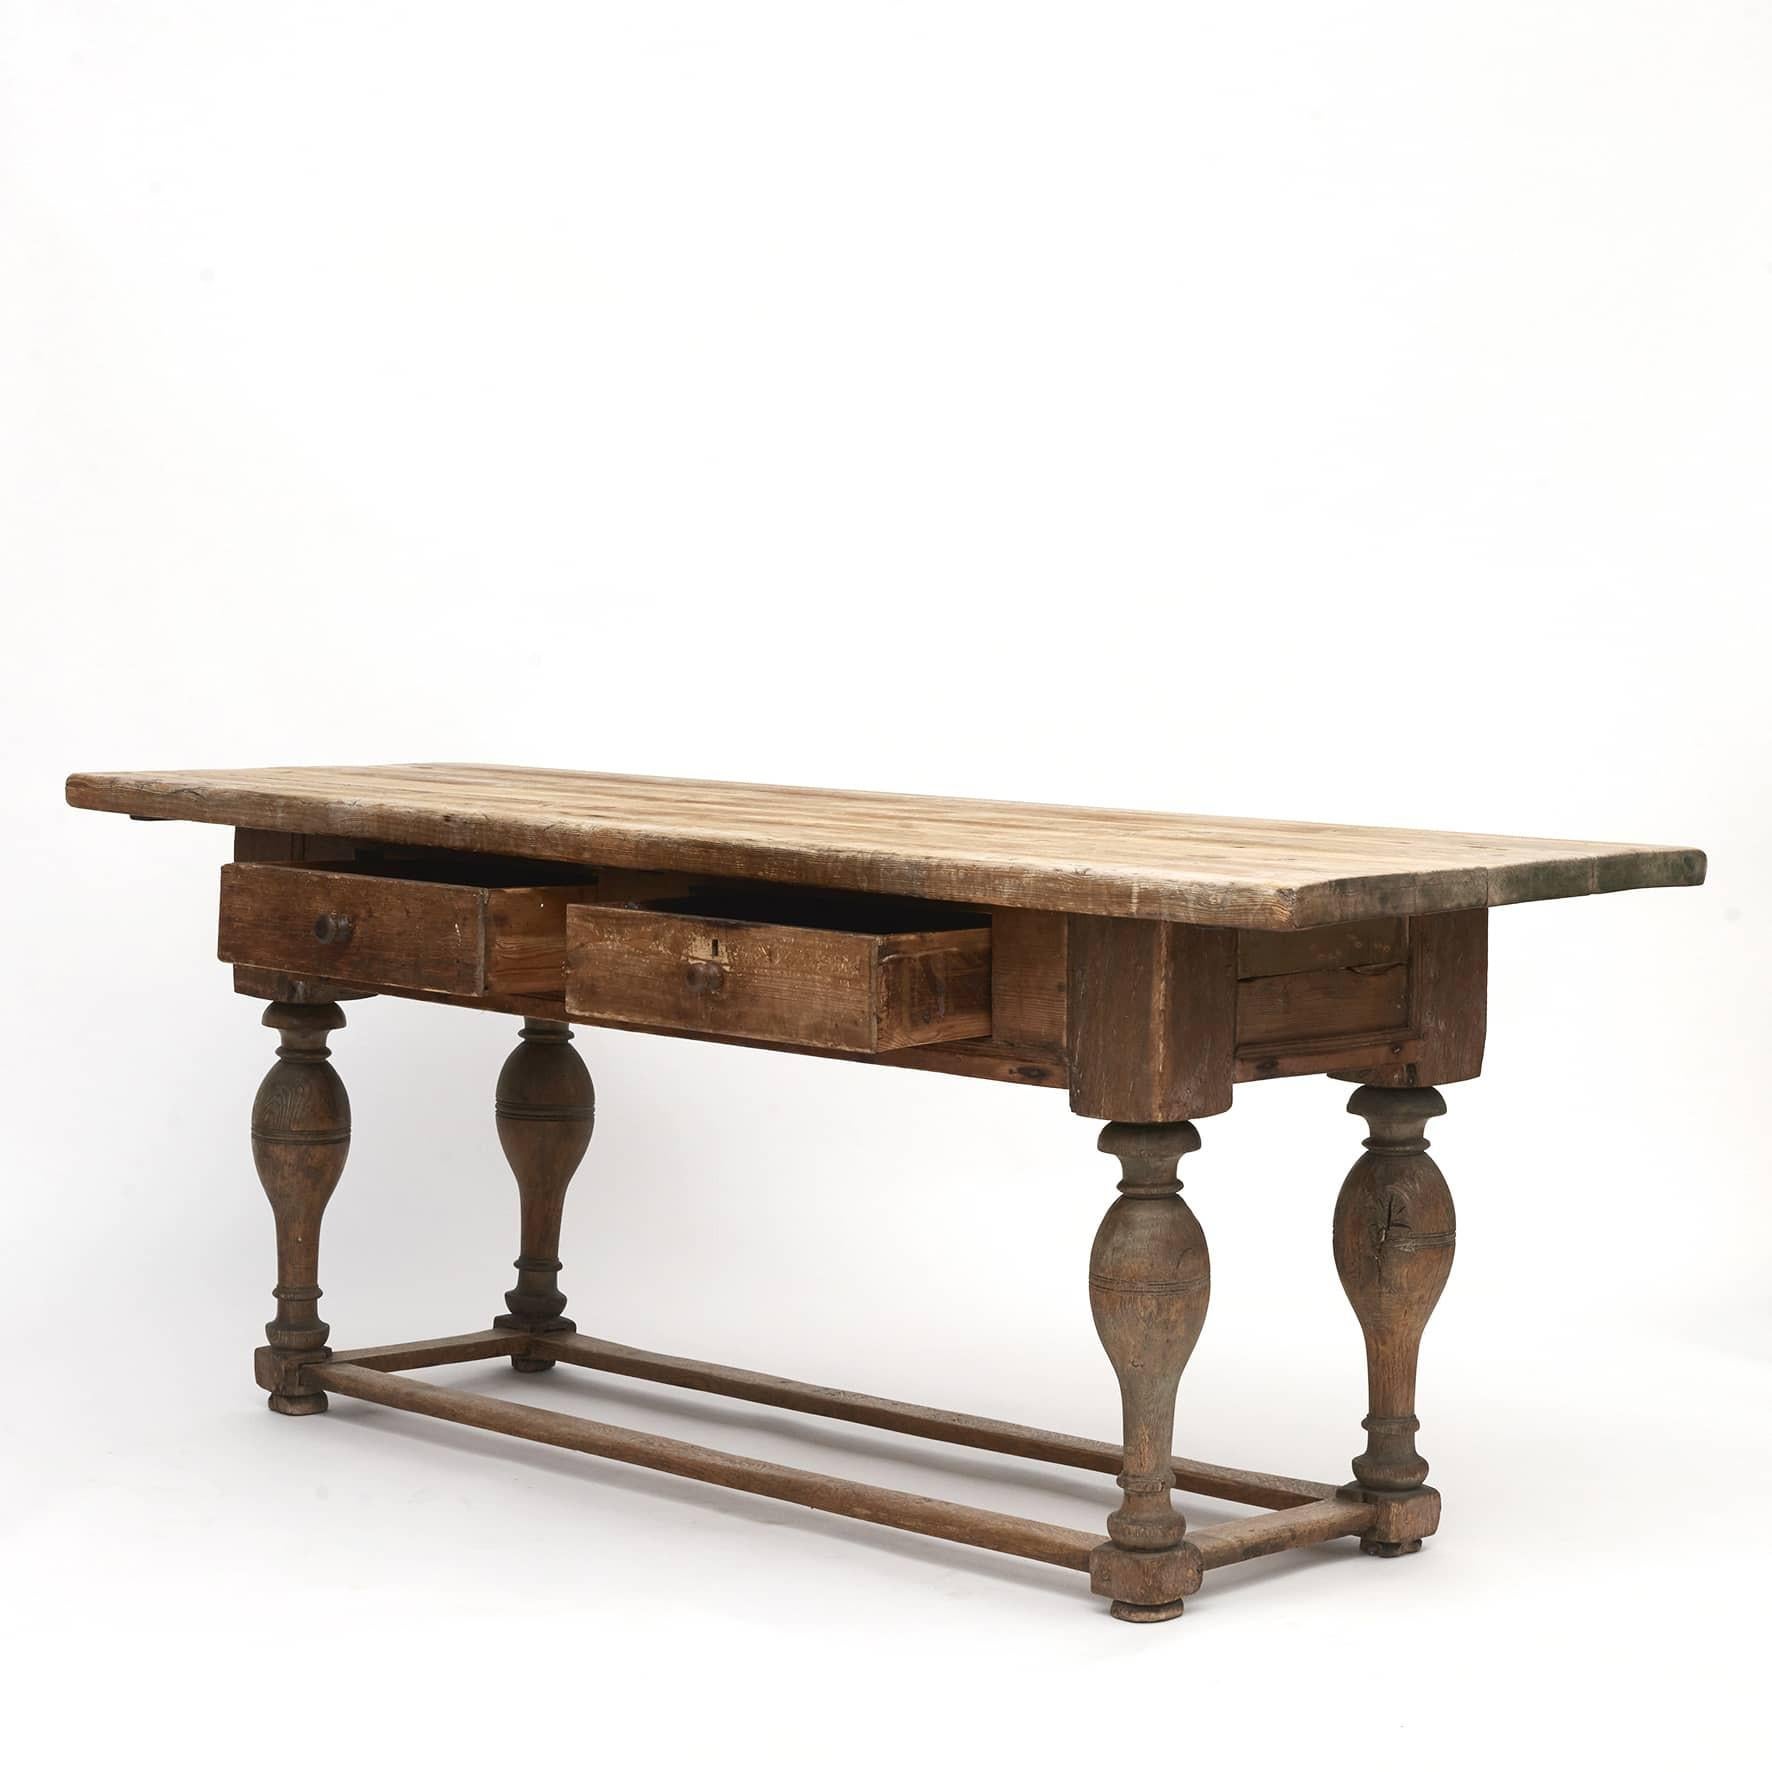 Danish Baroque table approx. 1750.
Pine table top, apron and drawers. Legs in oak with a box stretcher base.
Raw style with a good expression.

Original condition.